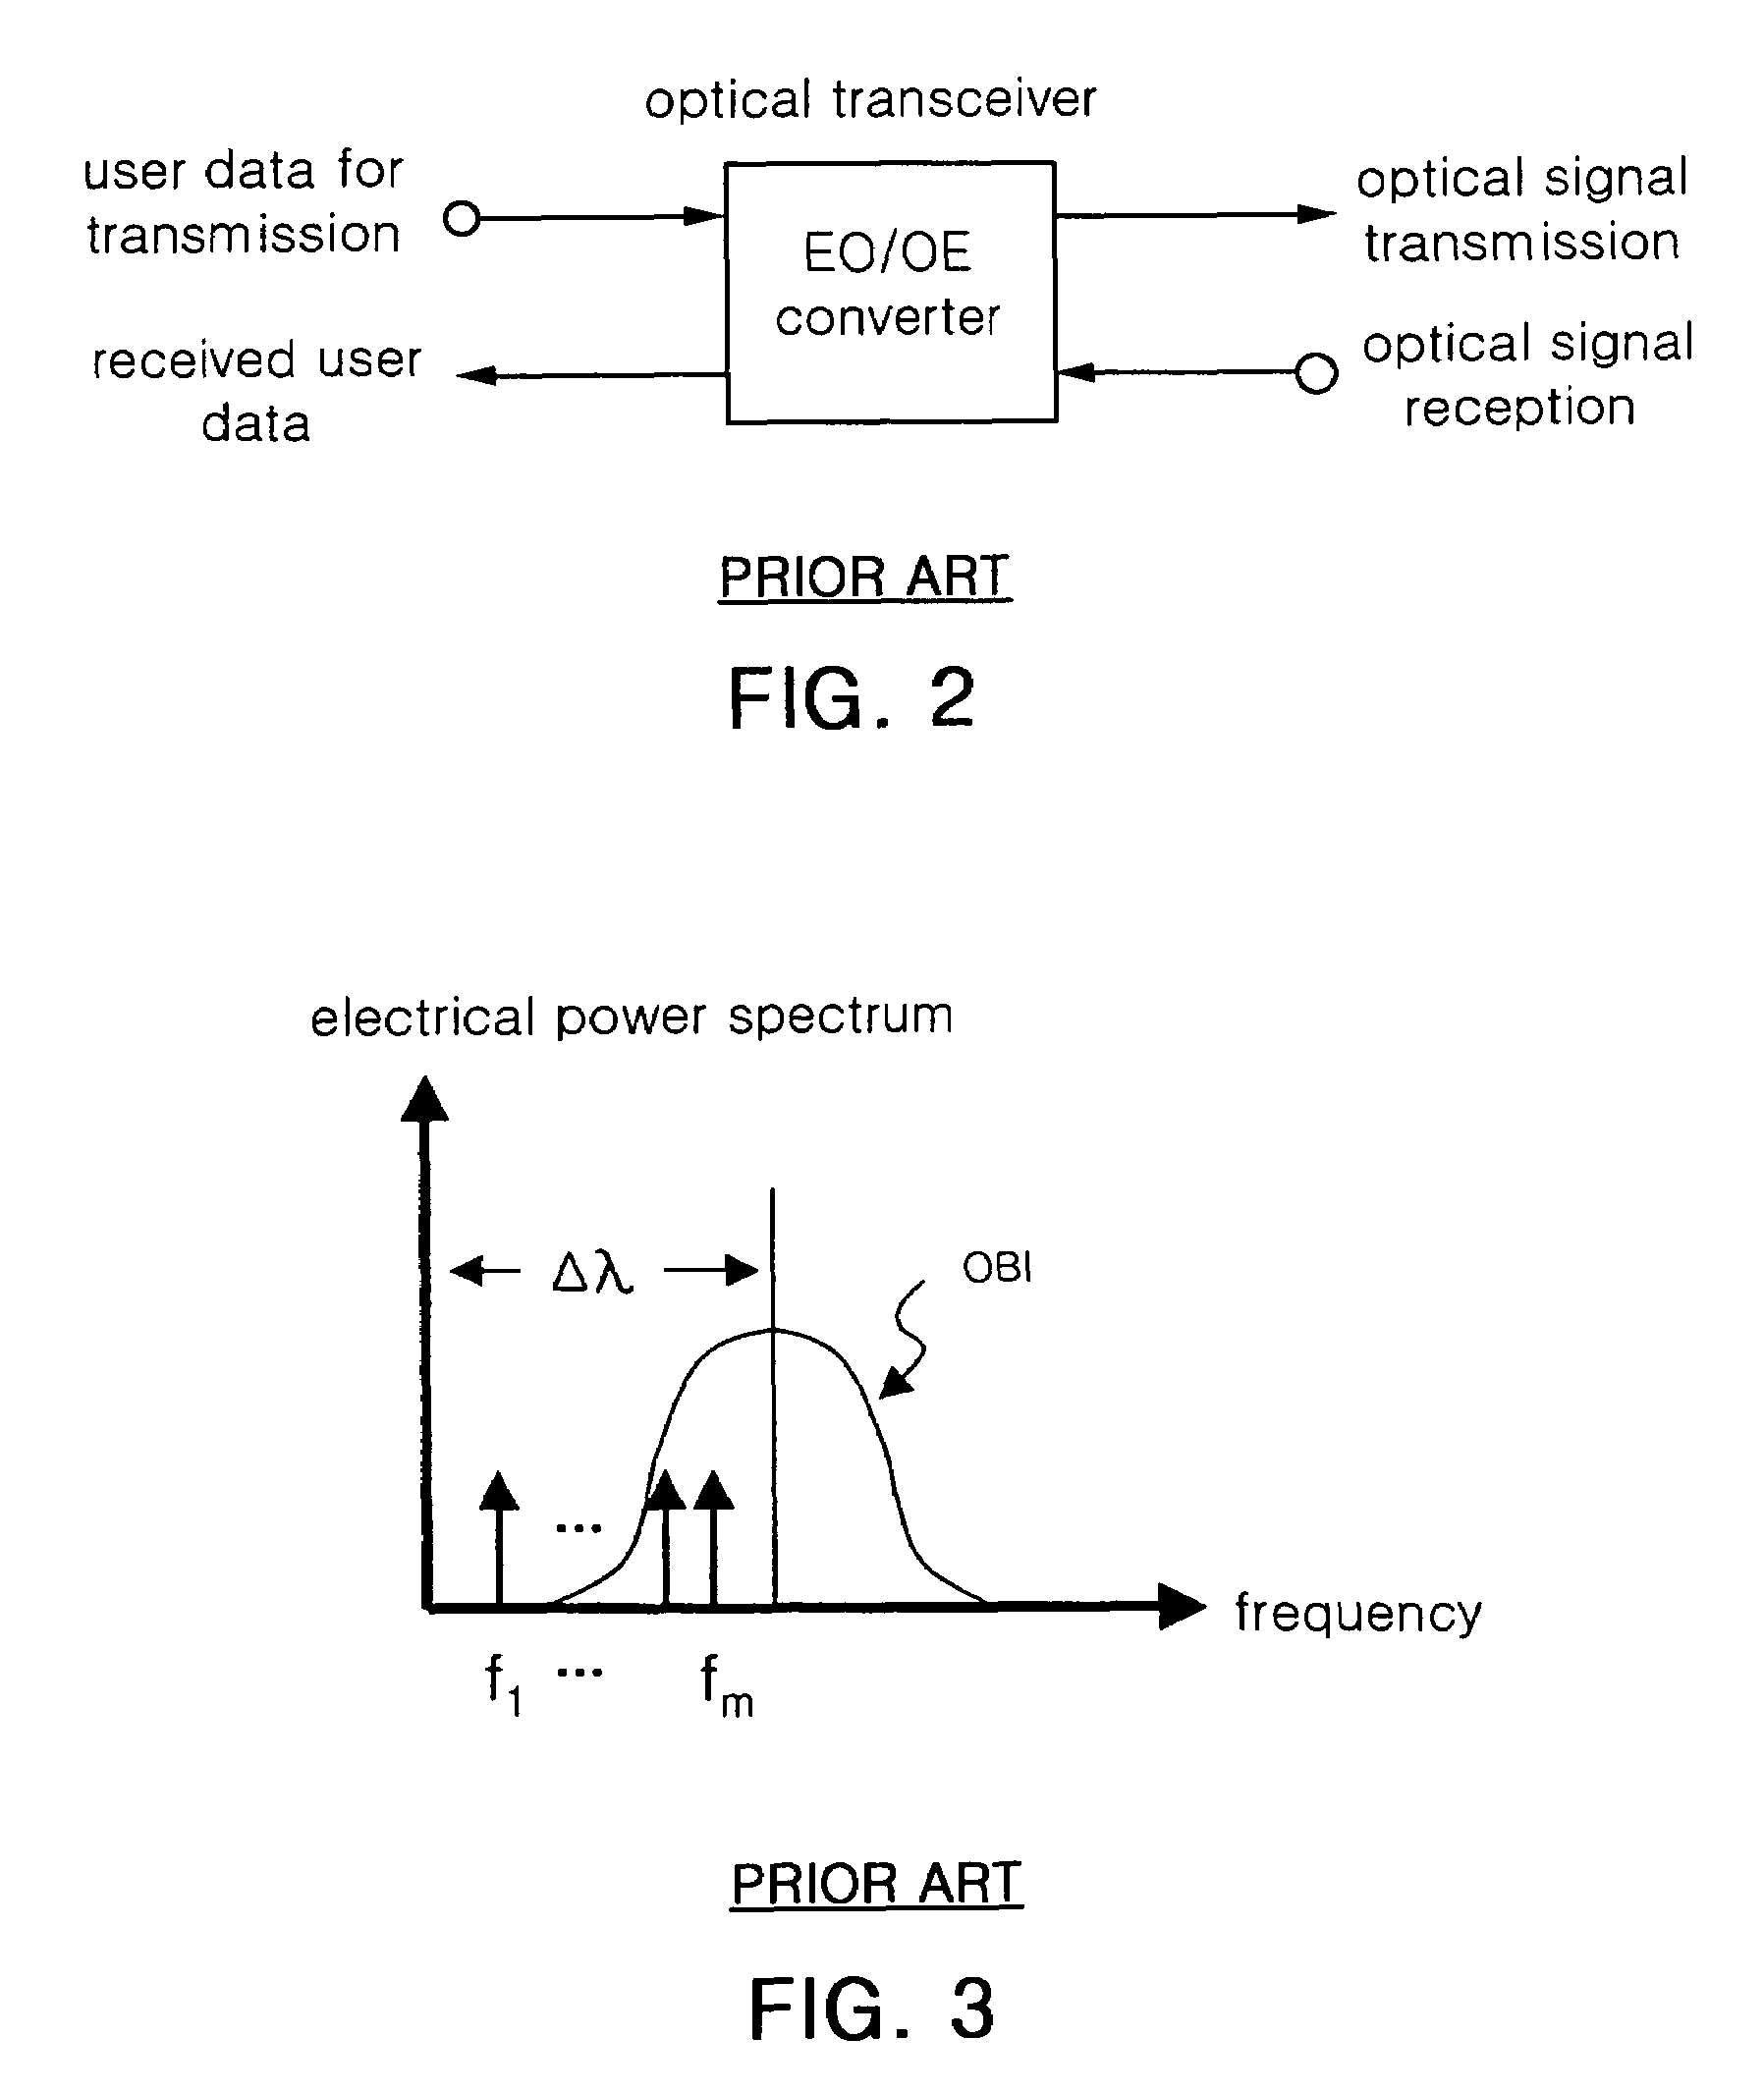 Optical transceiver for transmitting light source control information and optical network using the same